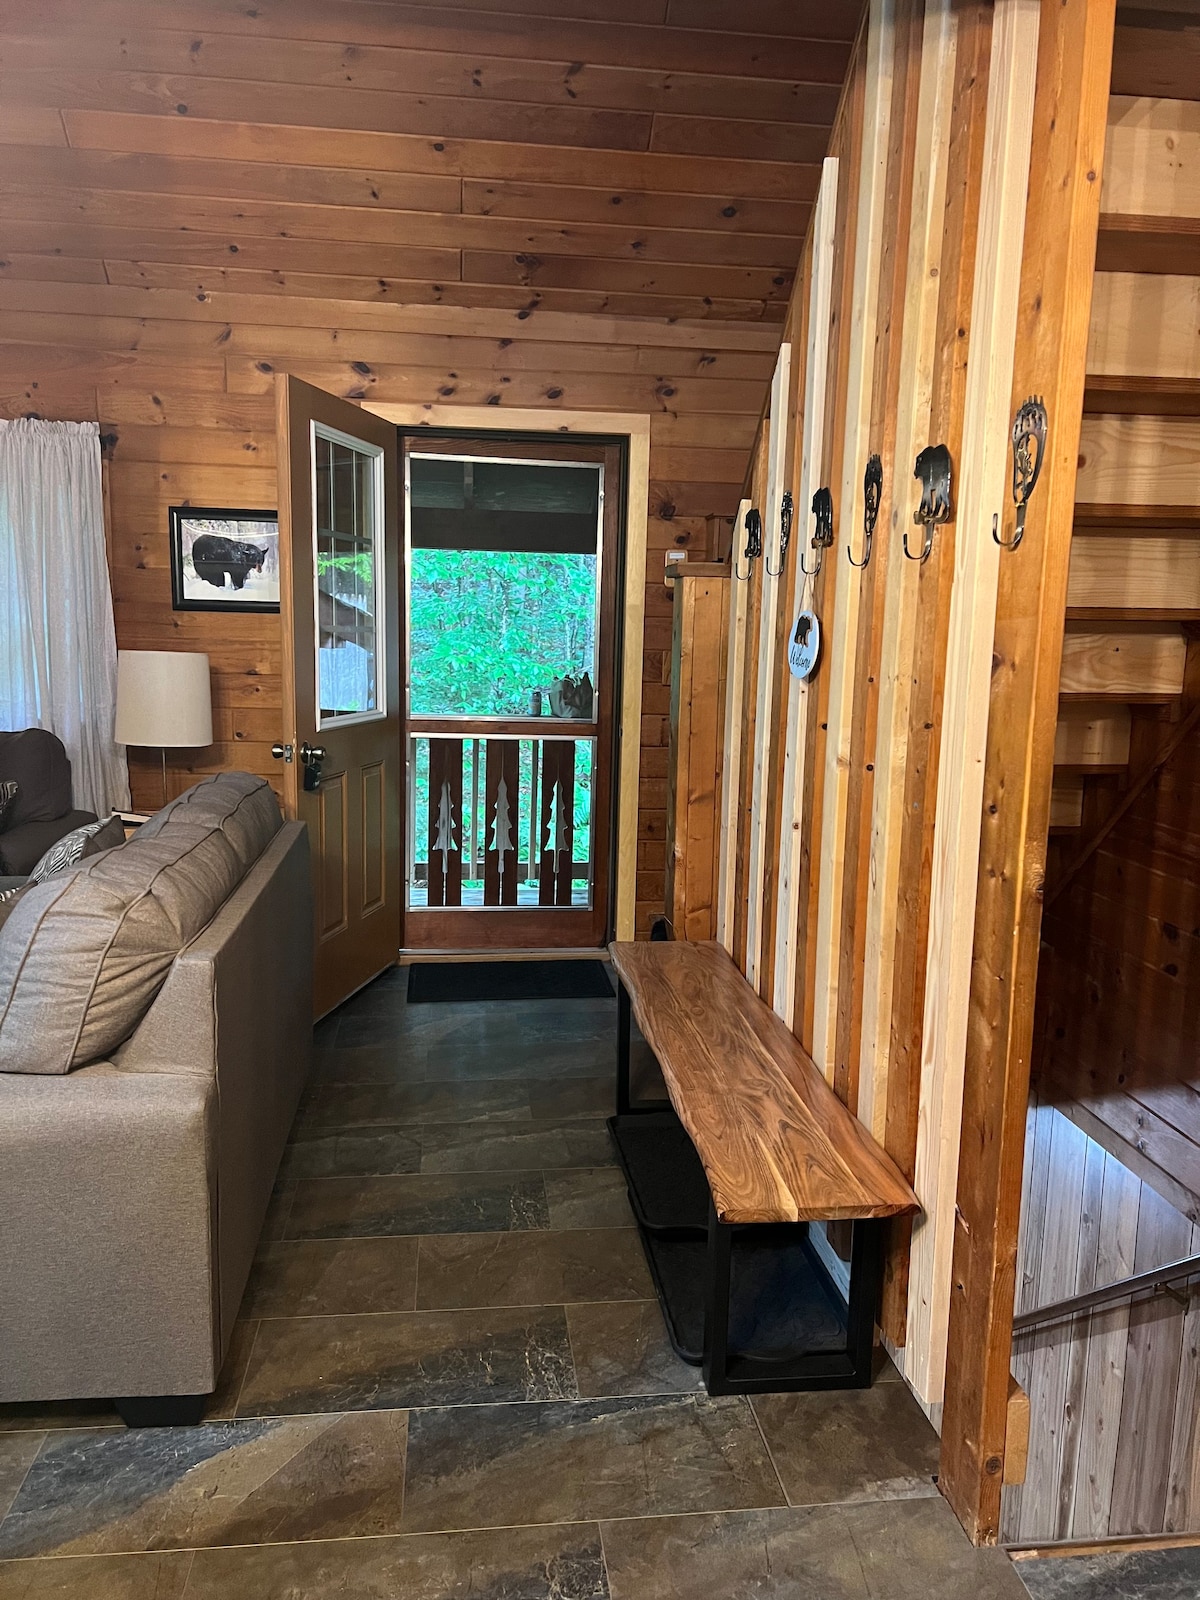 ADK Chalet, Secluded Peaceful Getaway in the Woods